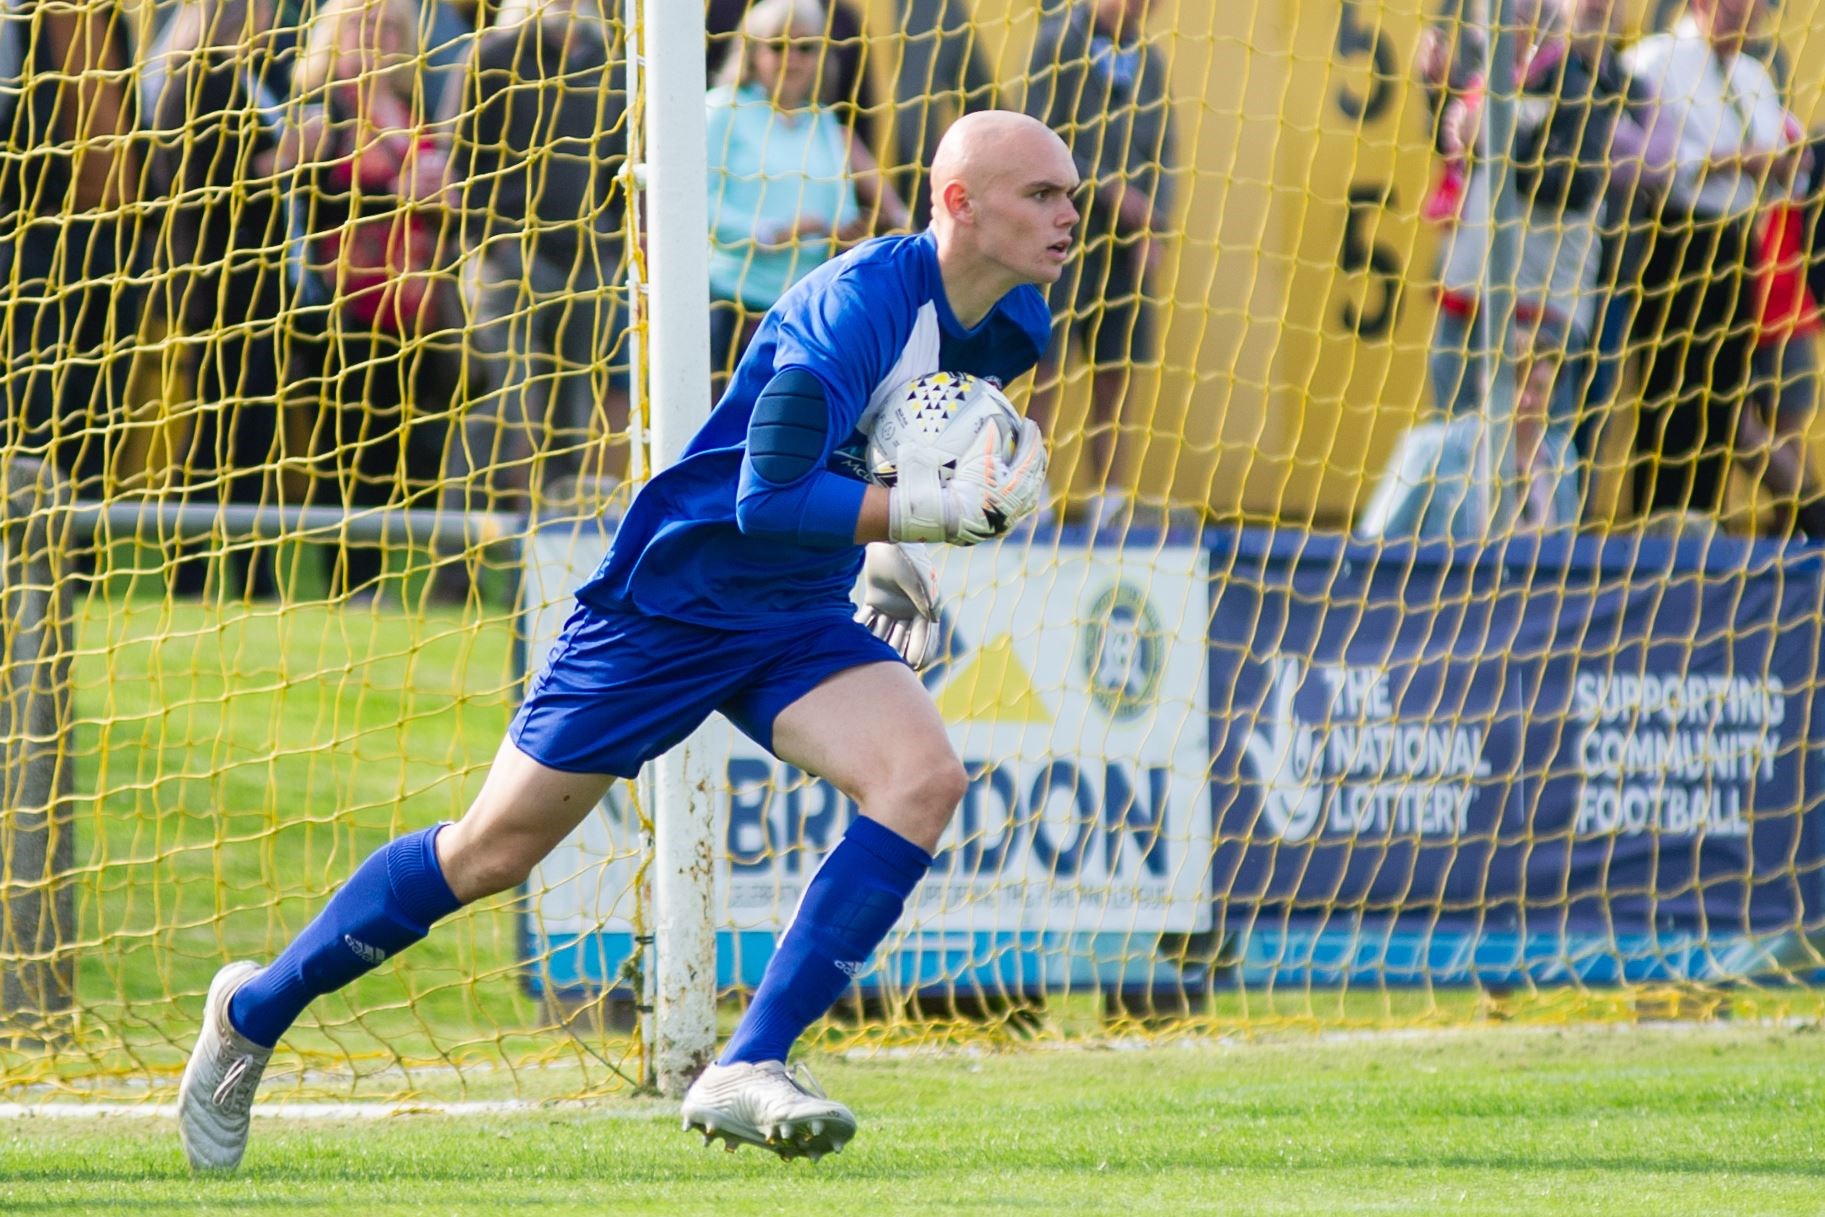 Lossiemouth keeper Logan Ross...Forres Mechanics FC (1) vs Lossiemouth FC (0) - Highland Football League - Mosset Park, Forres 28/08/2021...Picture: Daniel Forsyth..